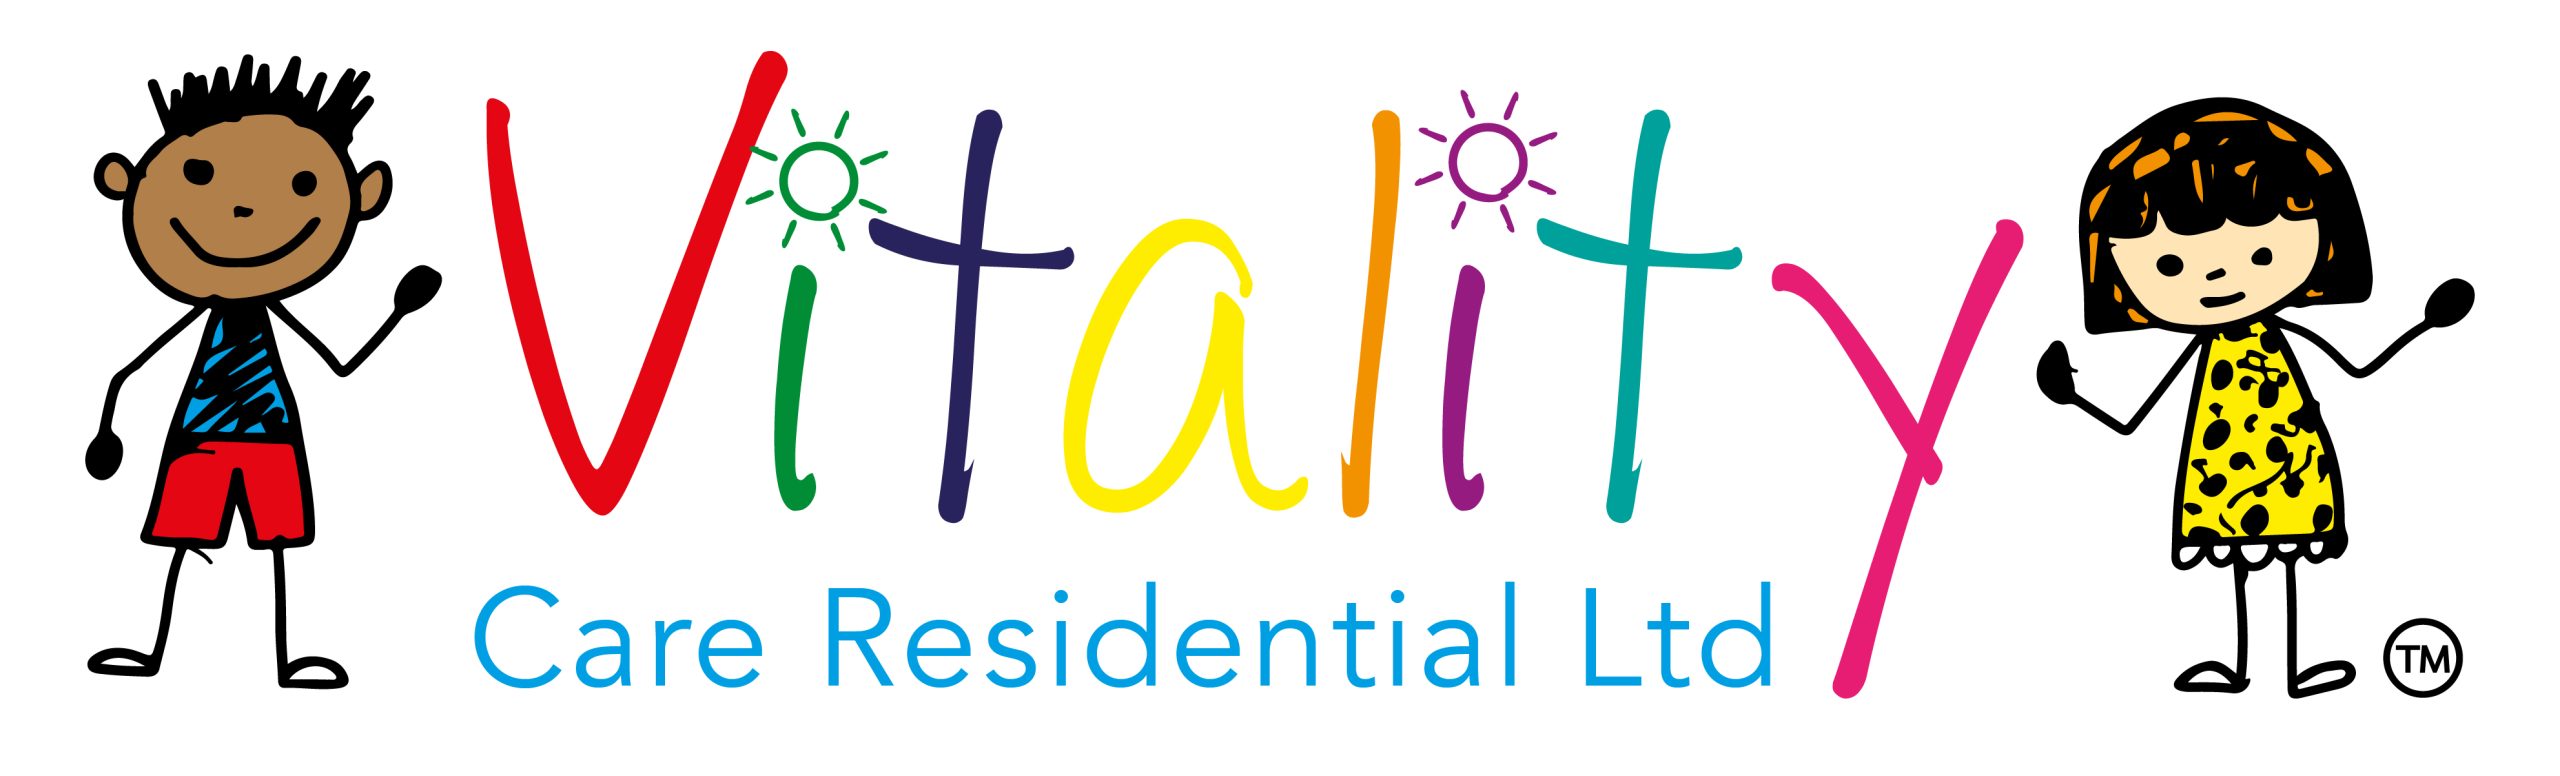 Vitality Care Residential